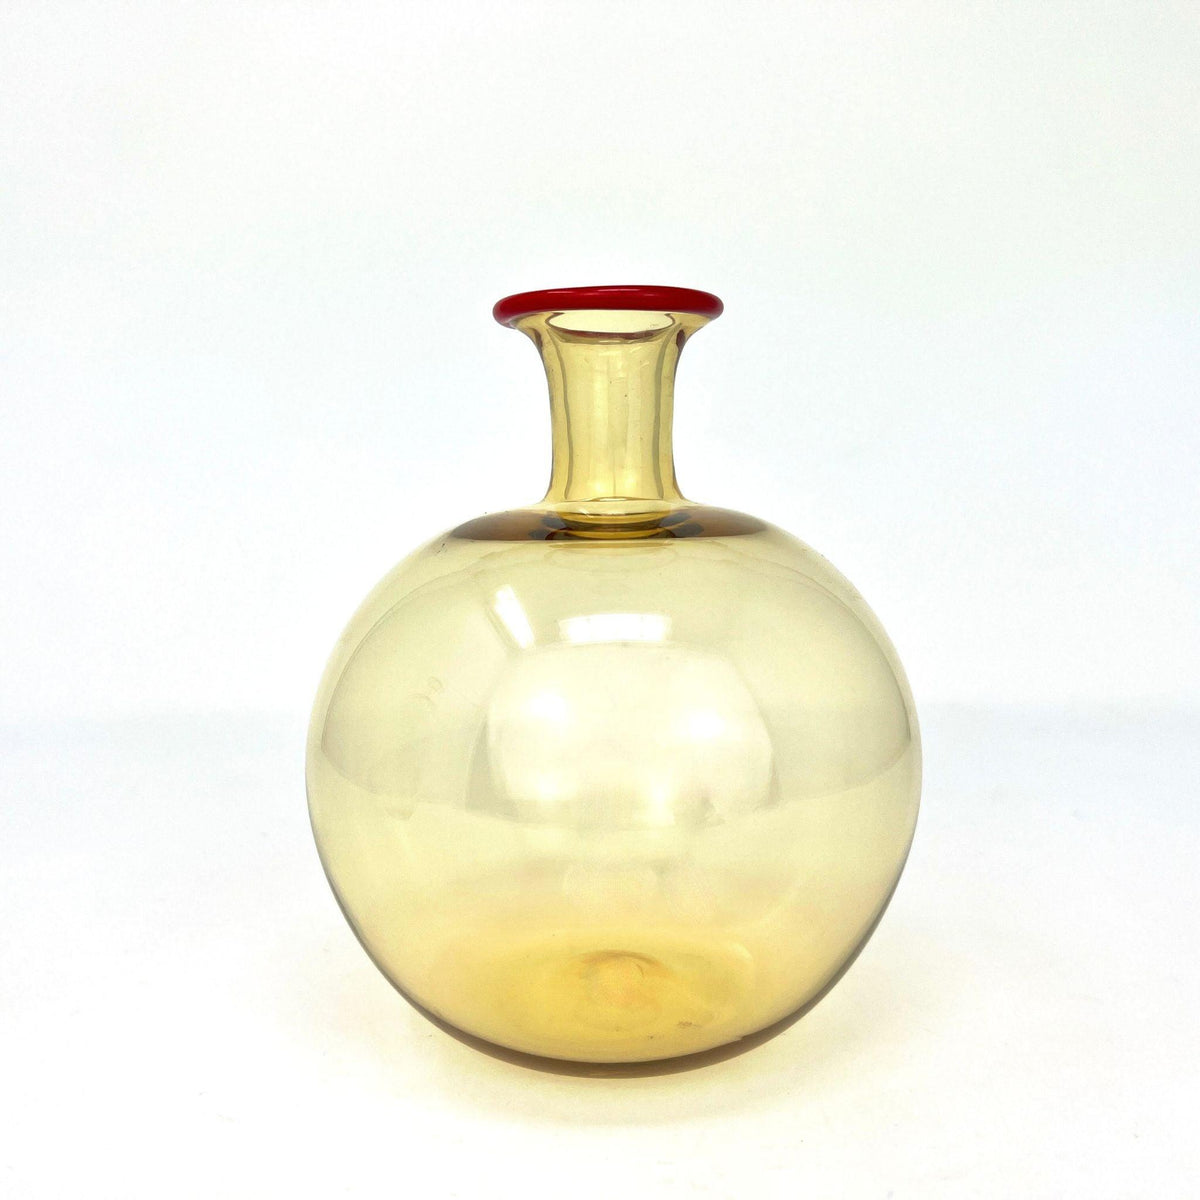 Collectible Red Rim Art Glass Vase/Vessel Set, Made in Murano, Italy at MyItalianDecor